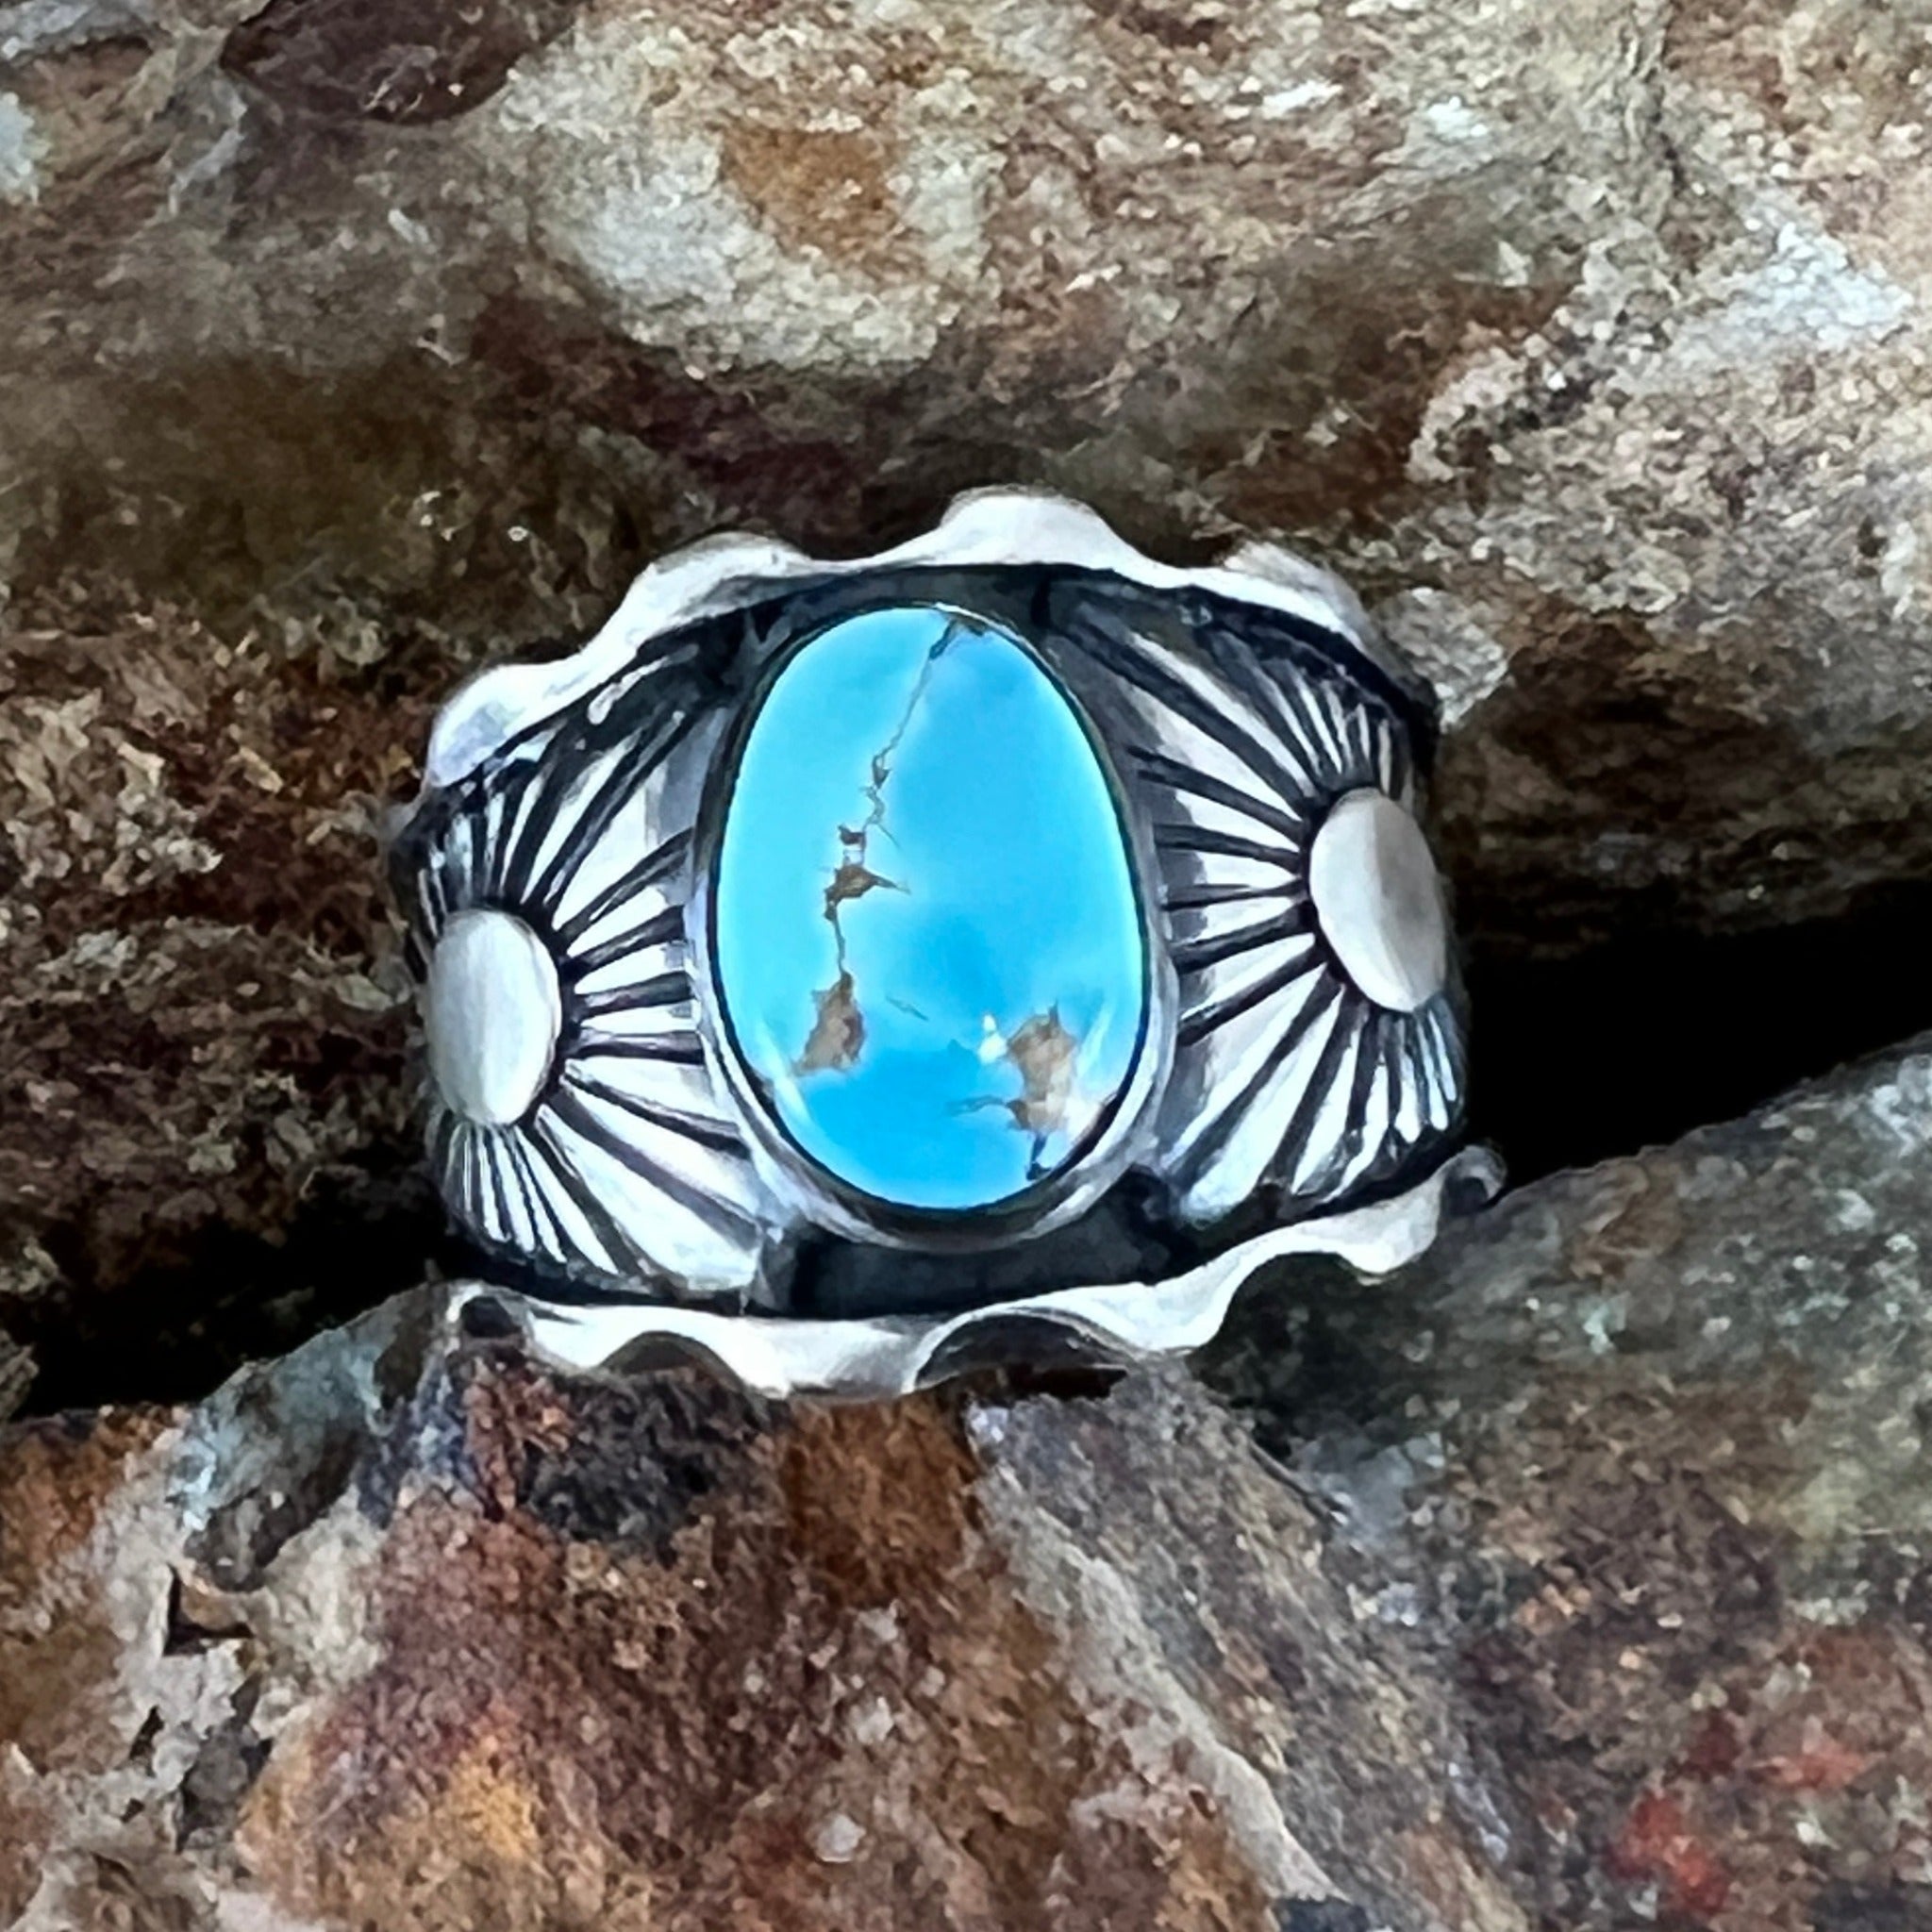 Heavy Men's Navajo Turquoise Ring Size 11.25, Native American Indian Jewelry,  Southwestern Gift Dad